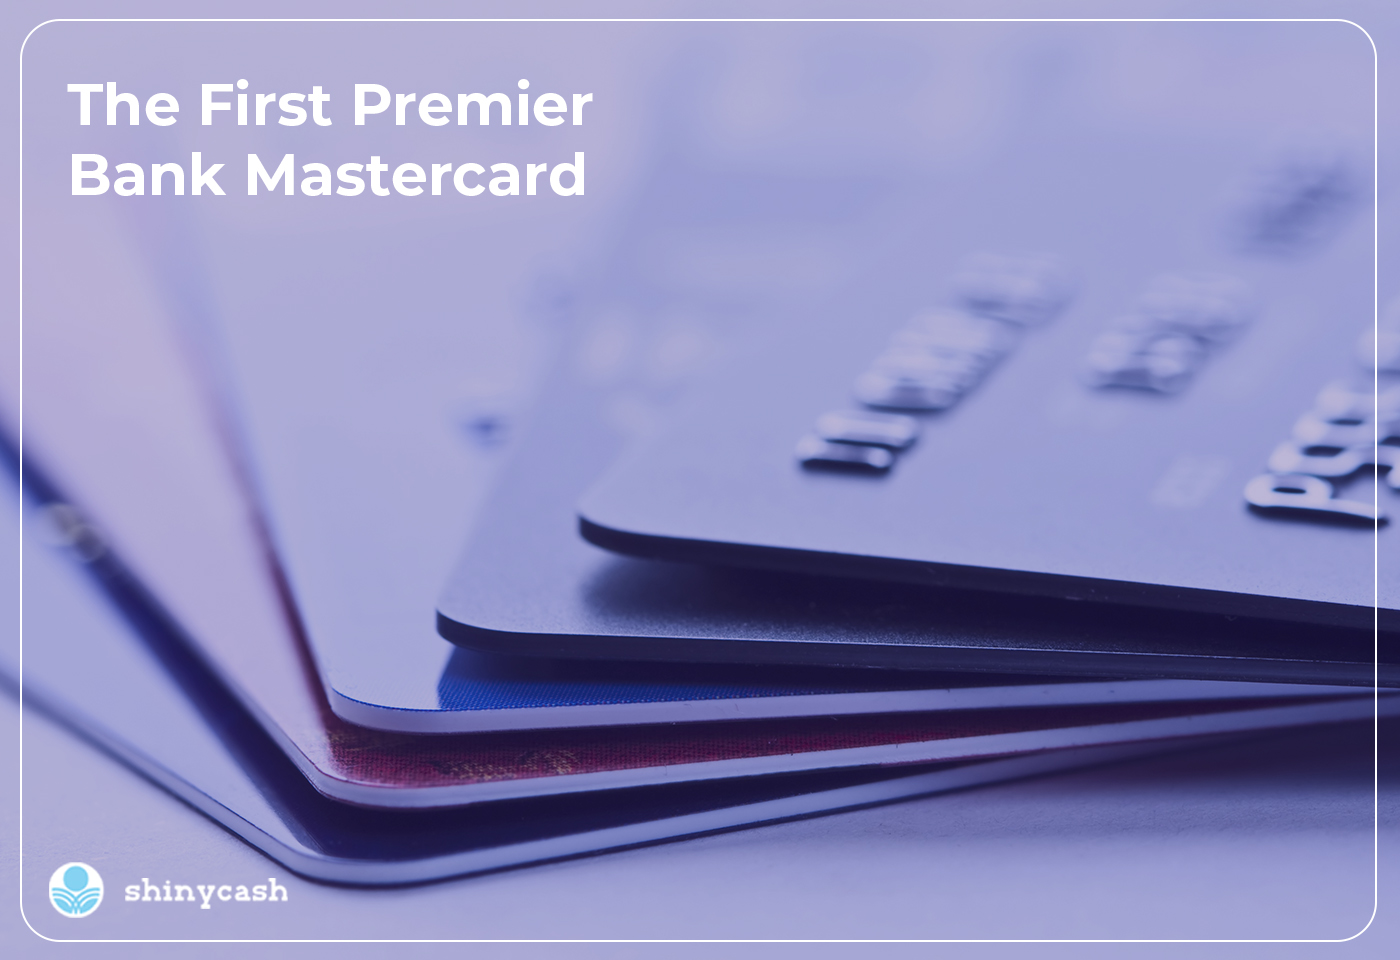 The First Premier Bank Mastercard